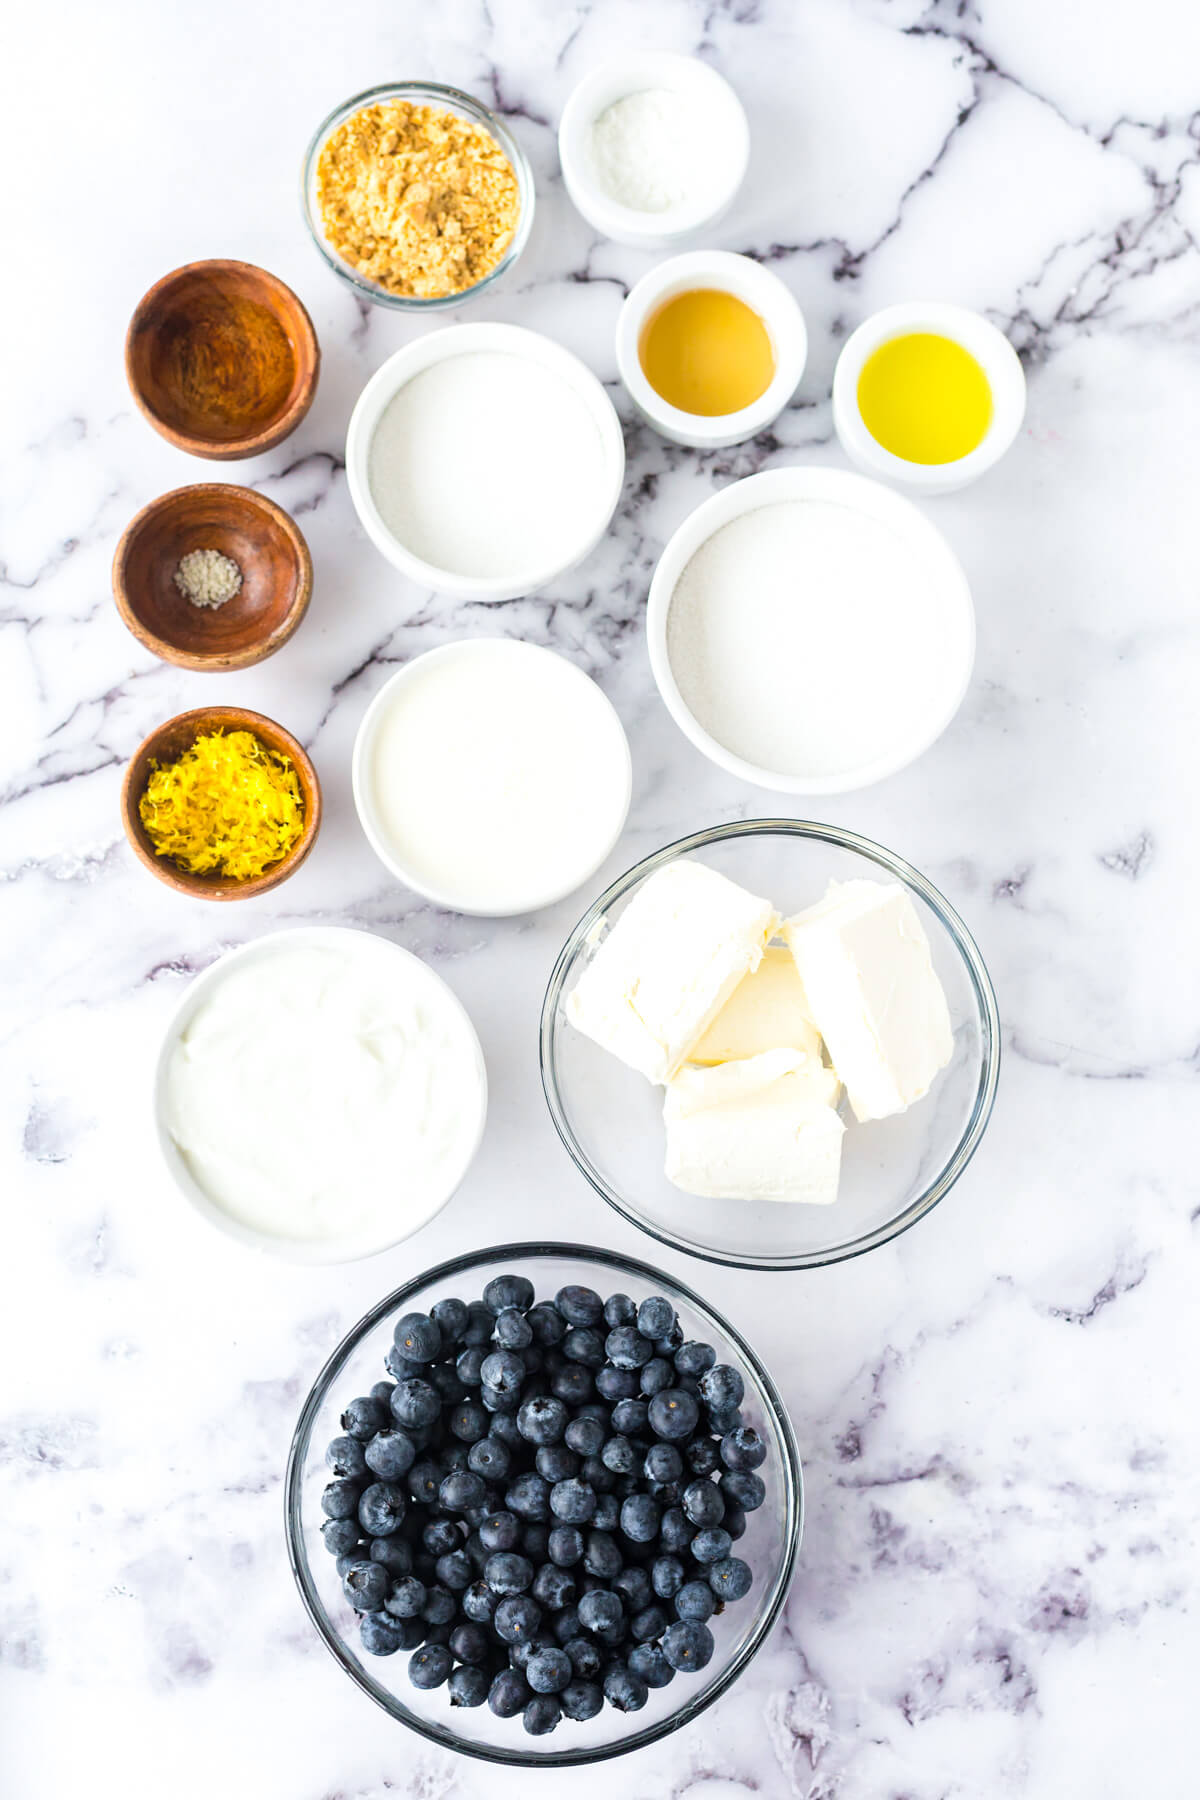 Ingredients required to make Blueberry Cheesecake Ice Cream.